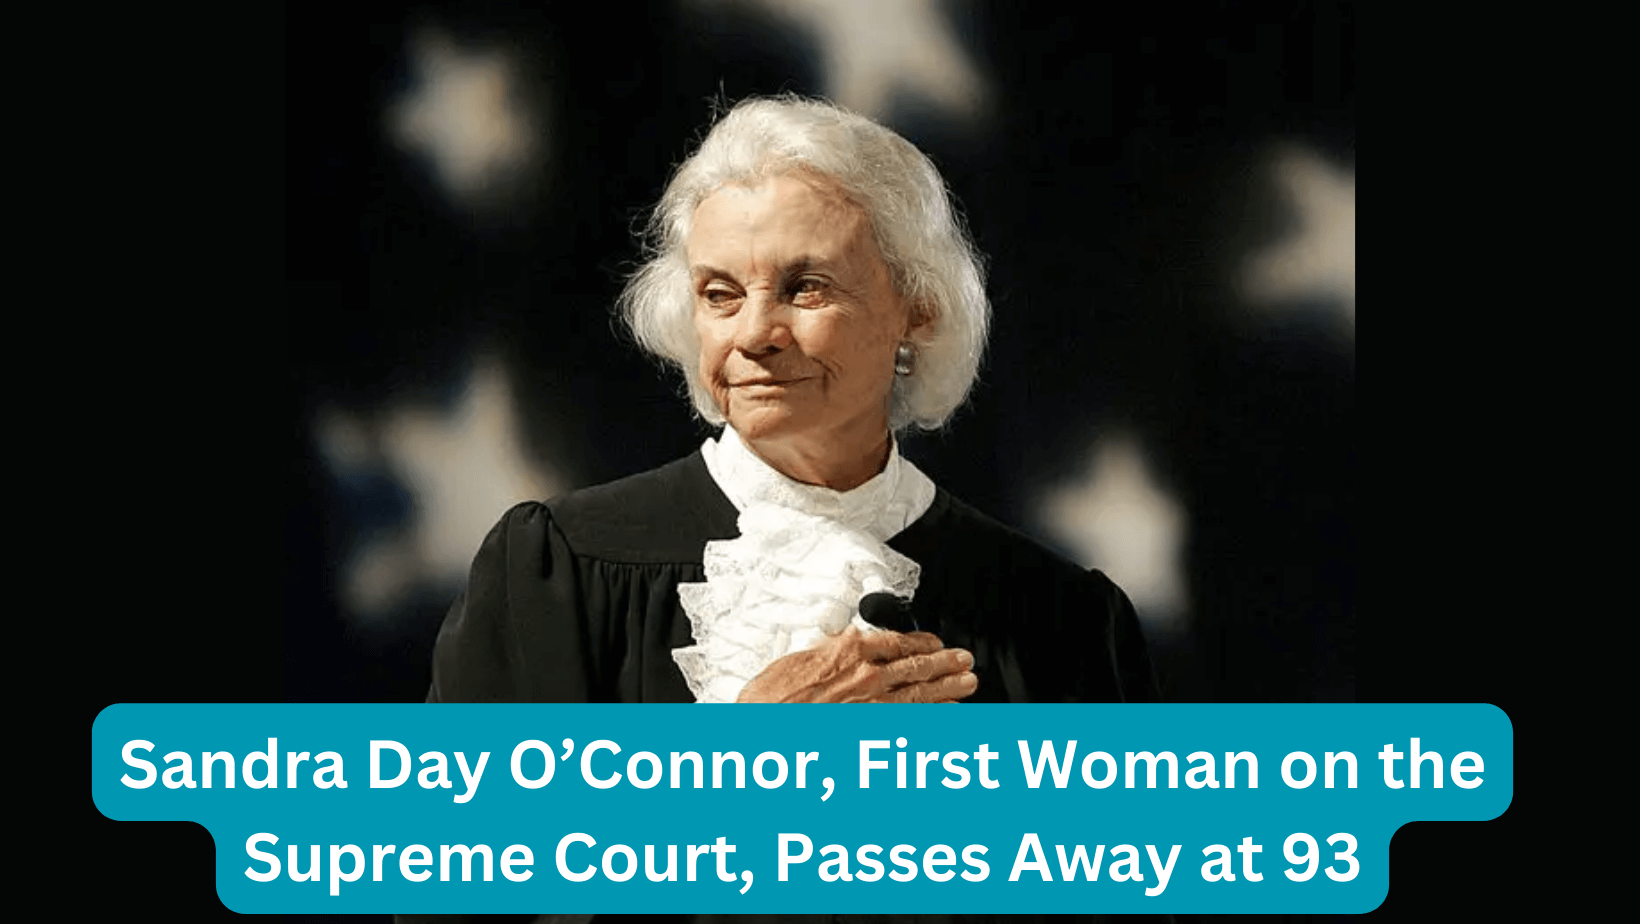 Sandra Day O’Connor, First Woman on the Supreme Court, Passes Away at 93